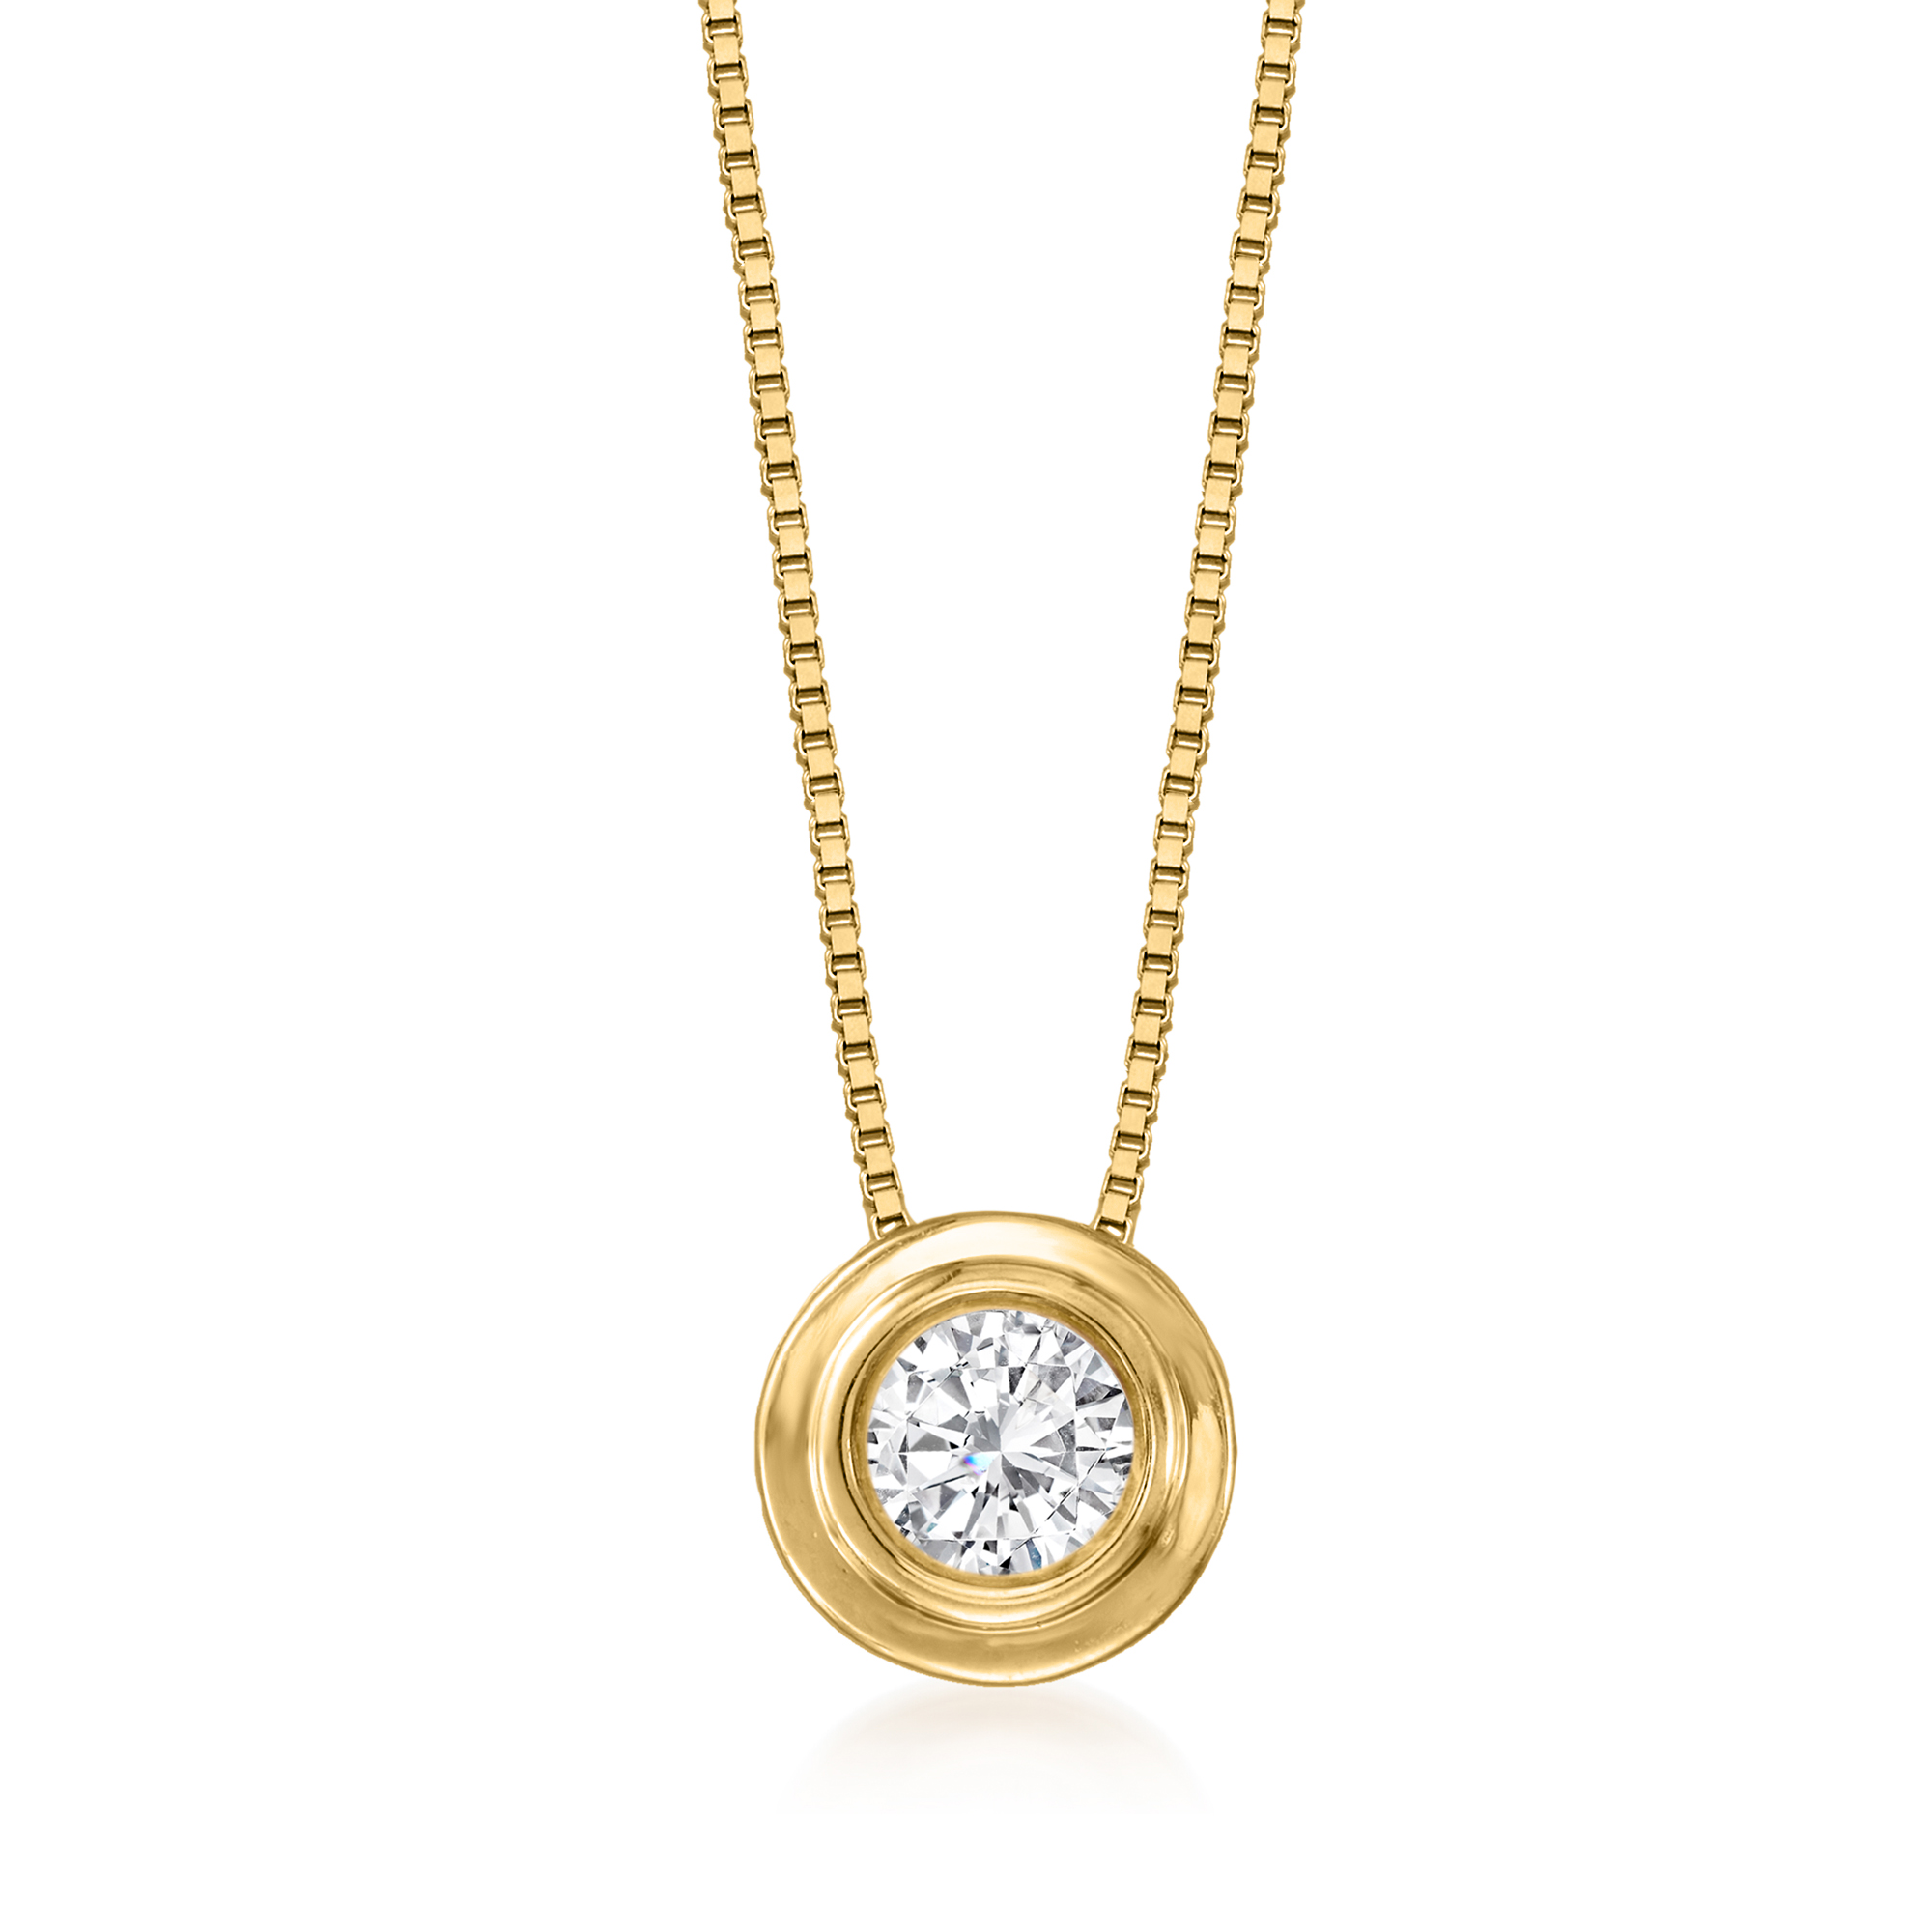 Details about   1.0 Ct Round Cut Diamond Solitaire Bezel Pendant 14K Yellow Gold Over Chain 18" 